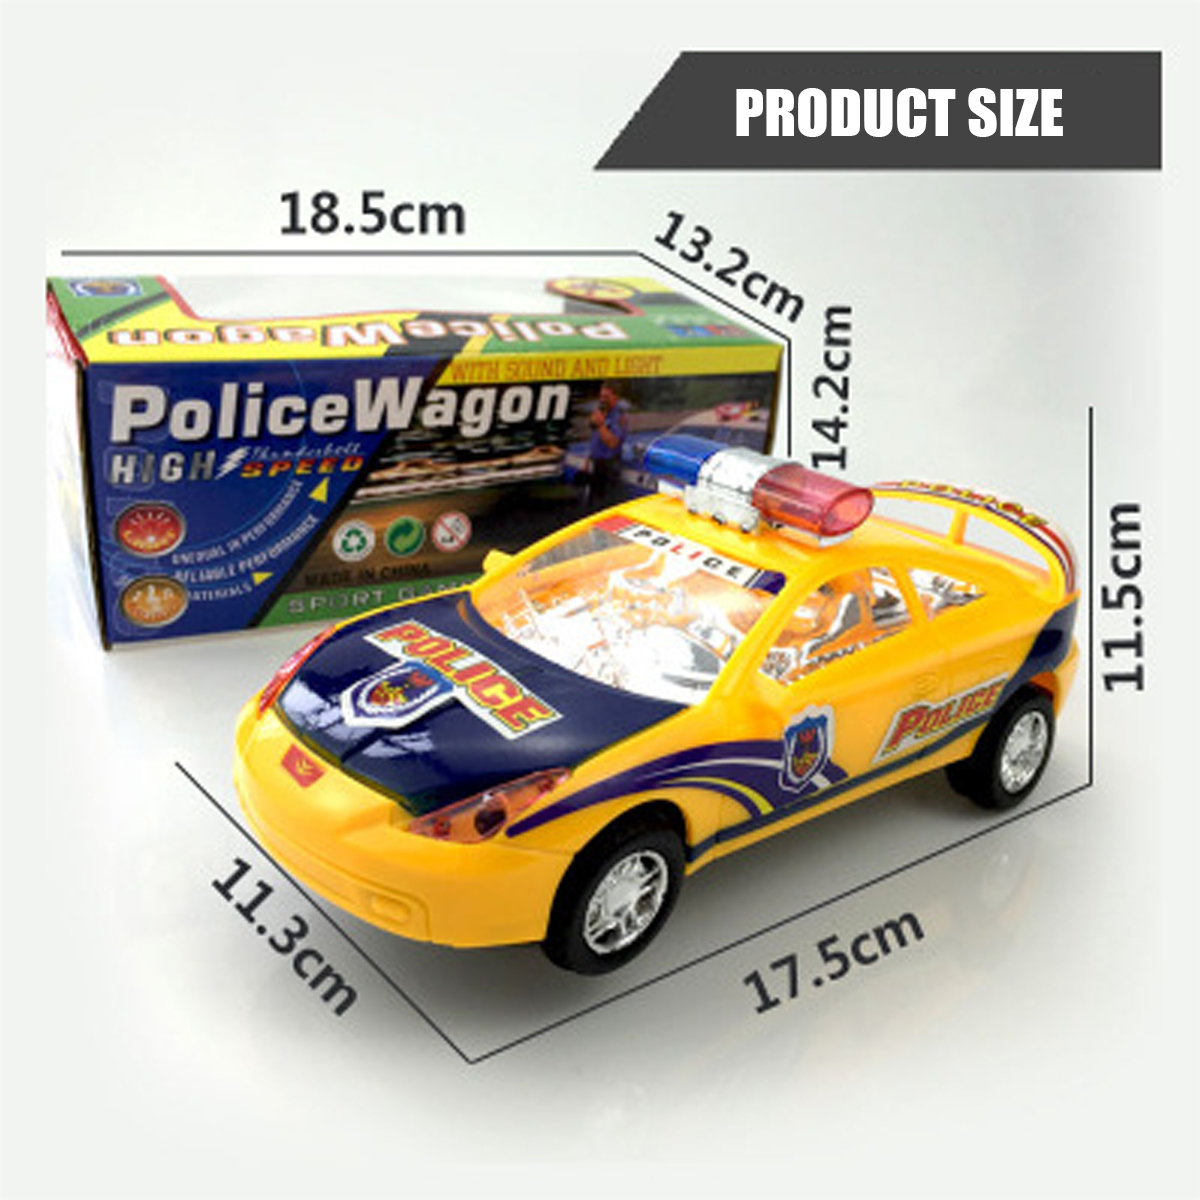 Childrens-Electric-Alloy-Simulation-Po-lice-Car-Diecast-Model-Toy-with-LED-Light-and-Music-1604579-11